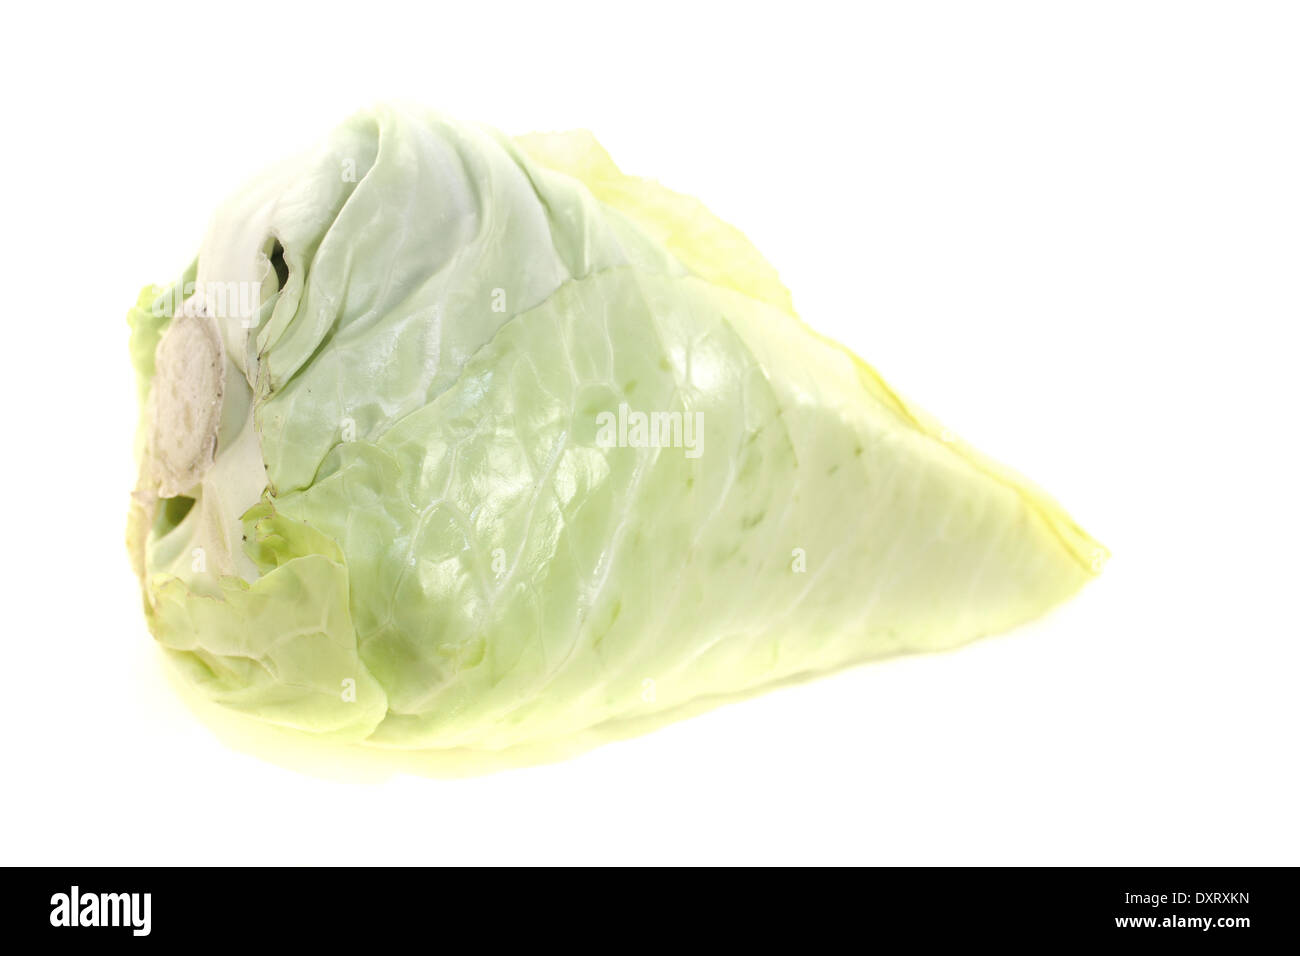 fresh pointed cabbage on a light background Stock Photo